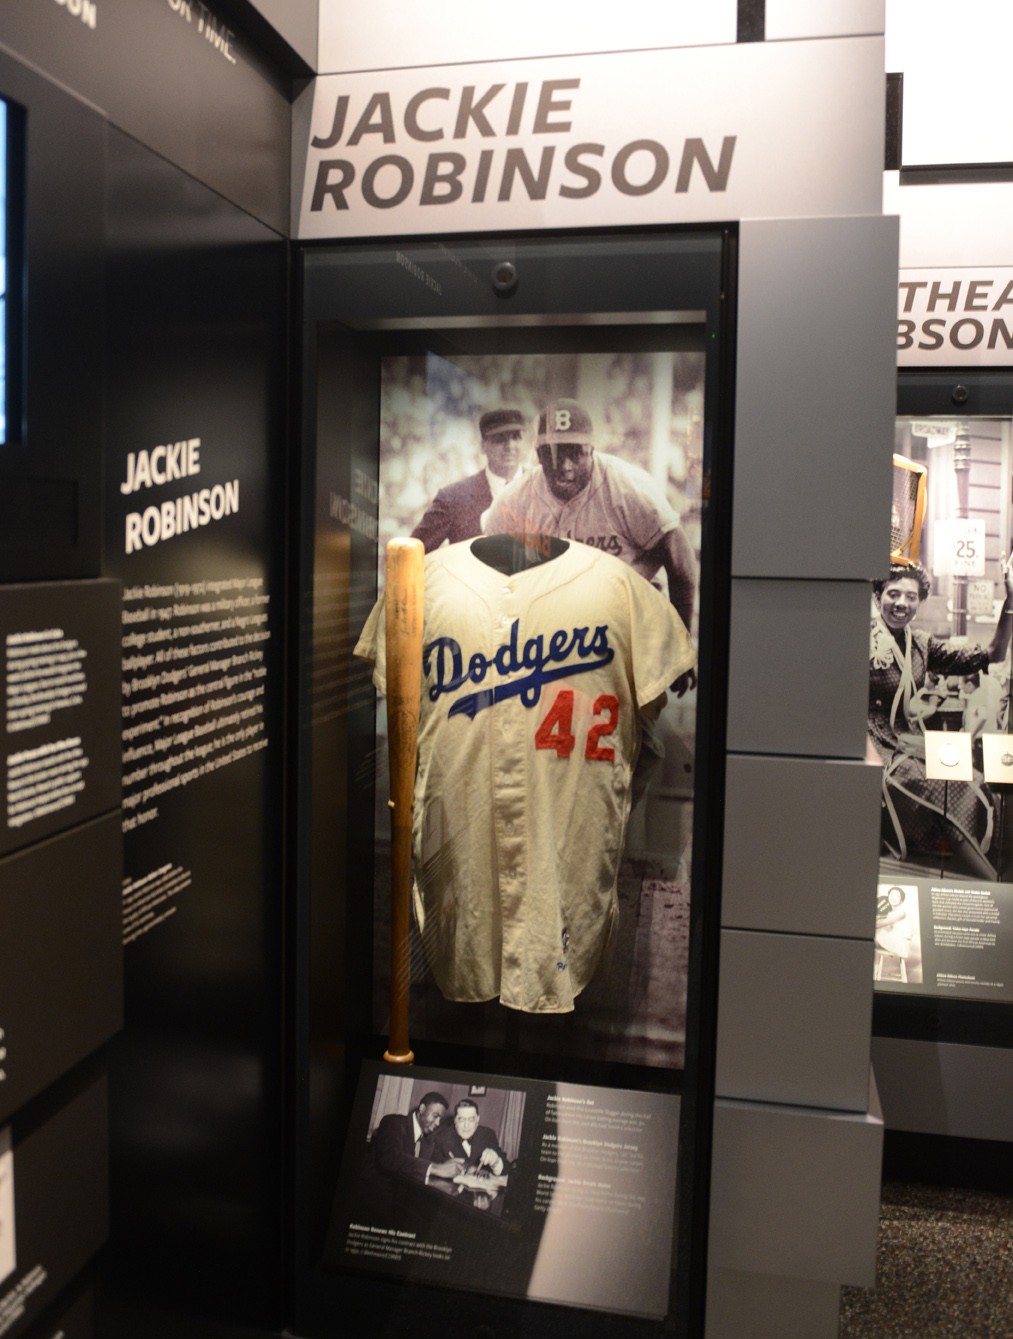 Sports Heroes Who Served: Baseball Great Jackie Robinson Was WWII Soldier >  U.S. Department of Defense > Story